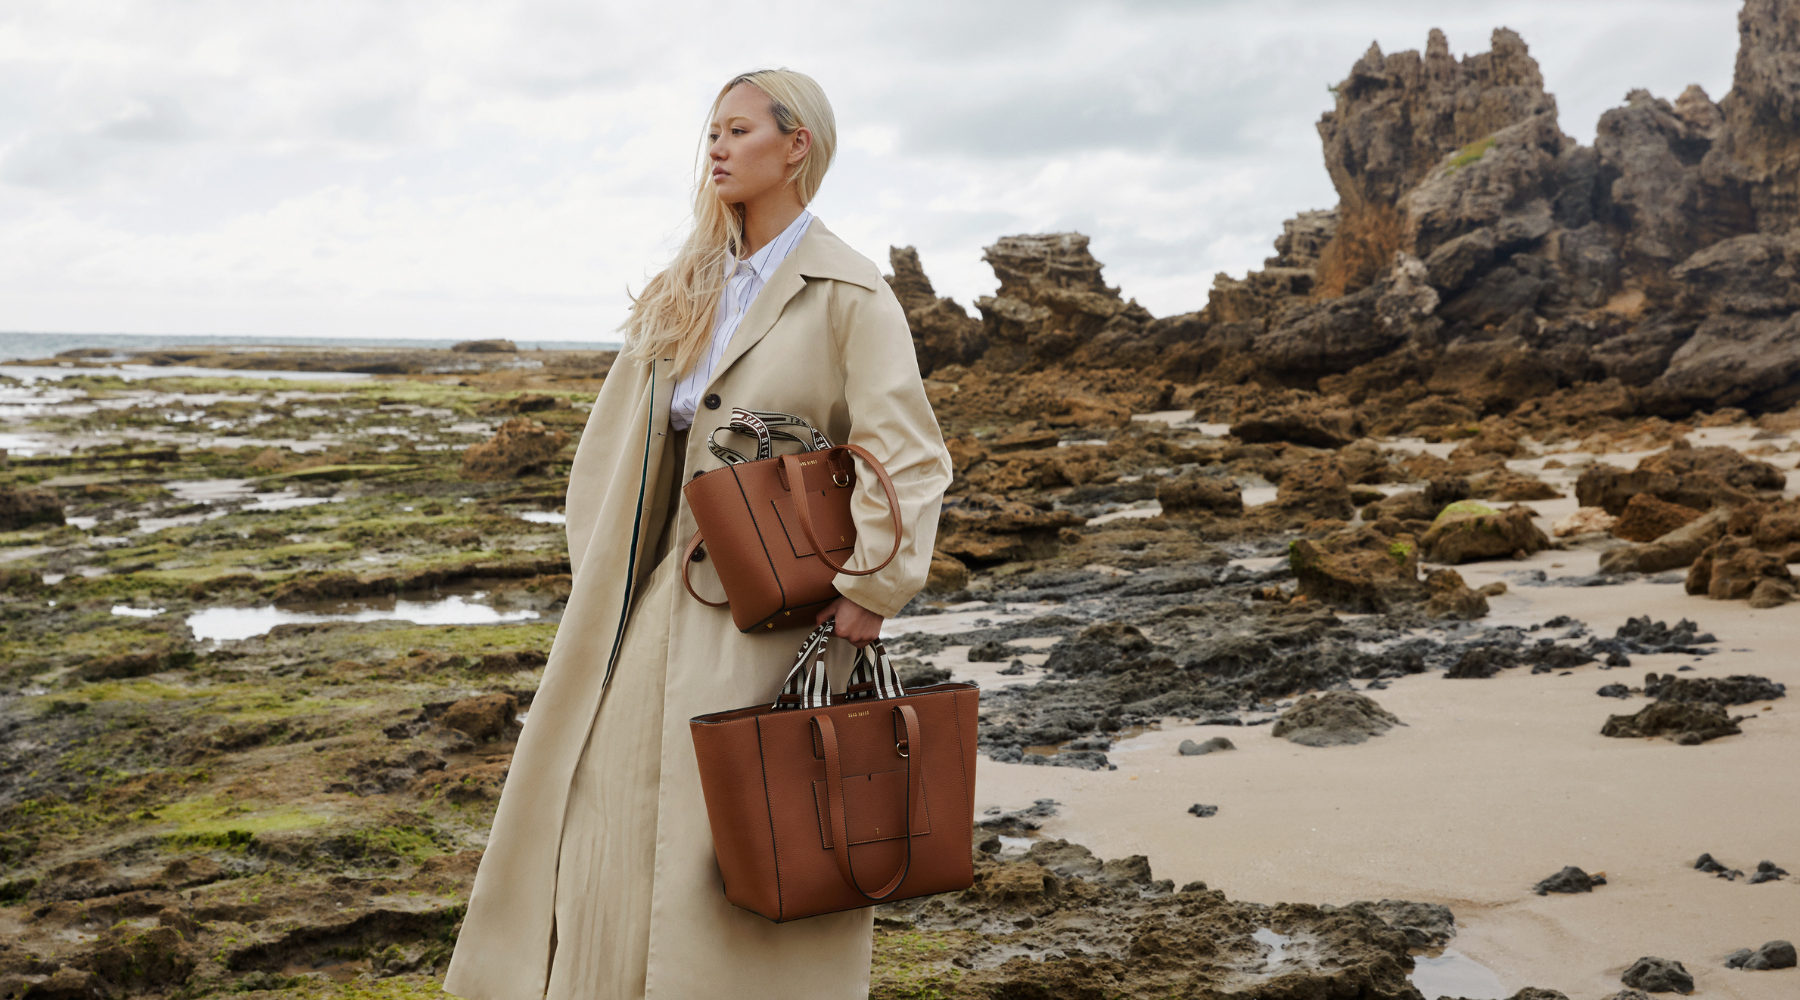 Dechen wears a cream toned trench coat and stands on a rocky beach, holding two brown Sans Beast tote bags